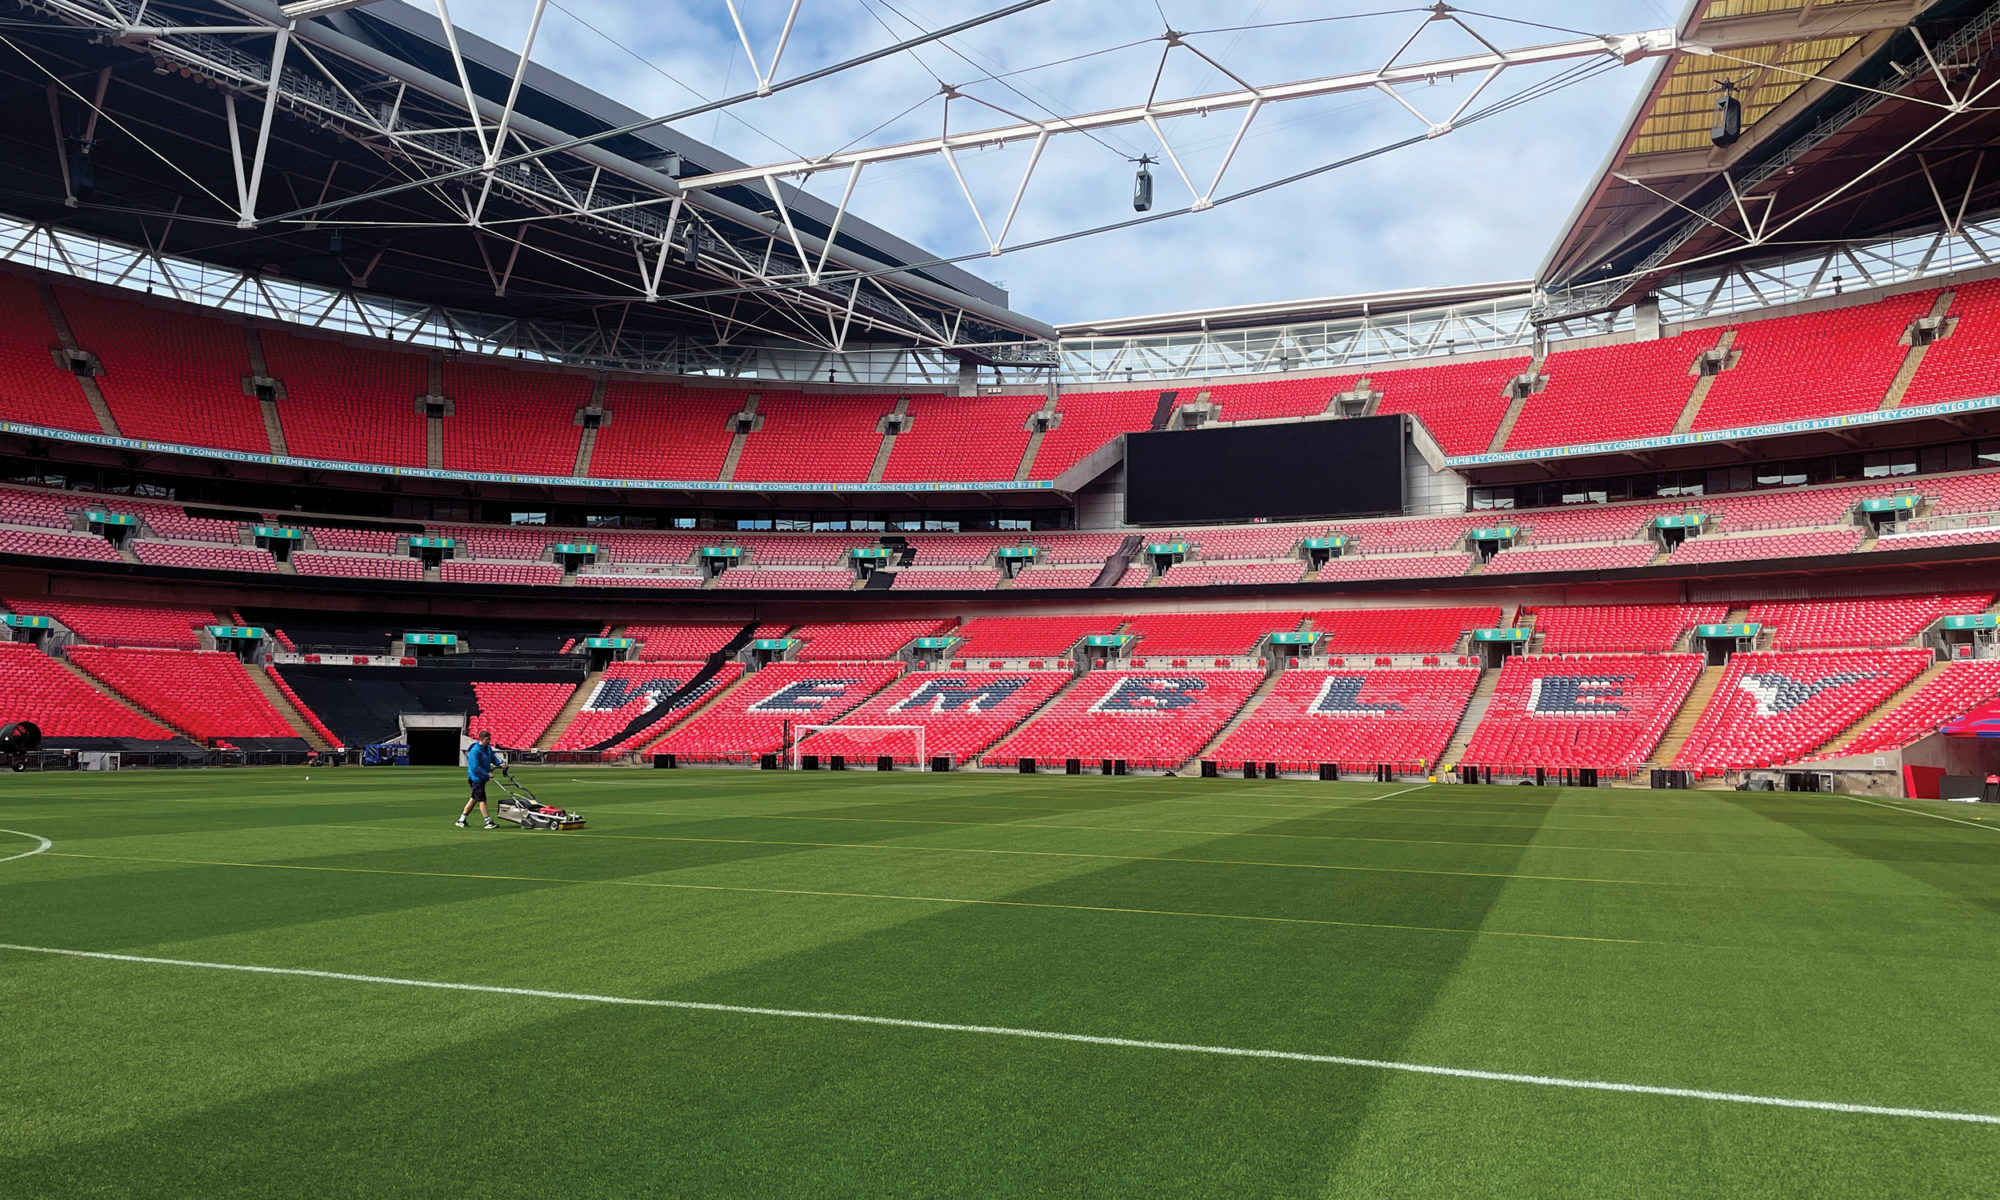 The pitch at Wembley Stadium